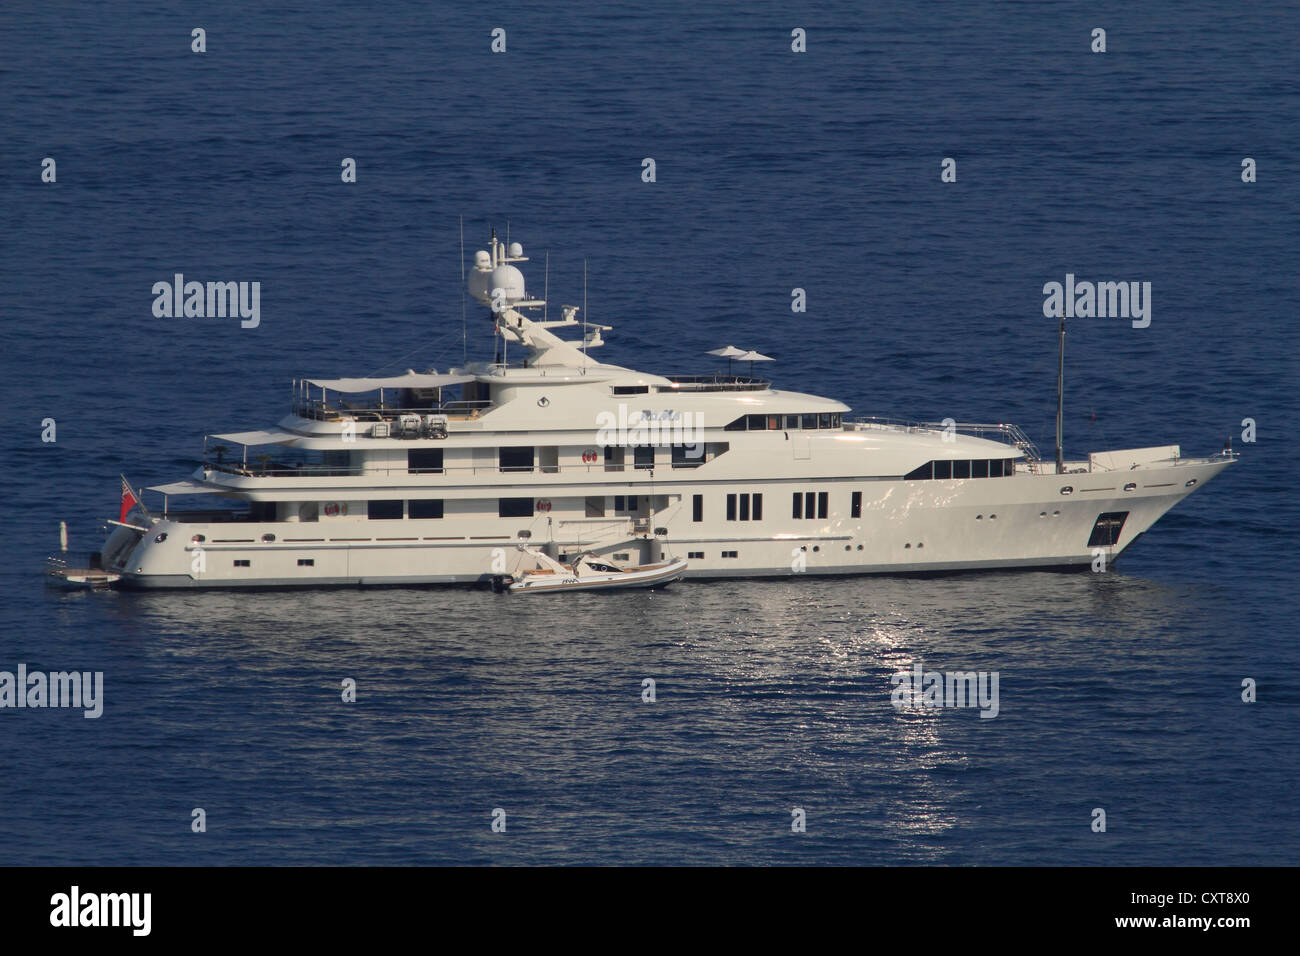 Motor yacht, RoMa, built by the Viareggio Superyachts shipyard, length of 61.8 metres, built in 2009, on the Côte d'Azur Stock Photo